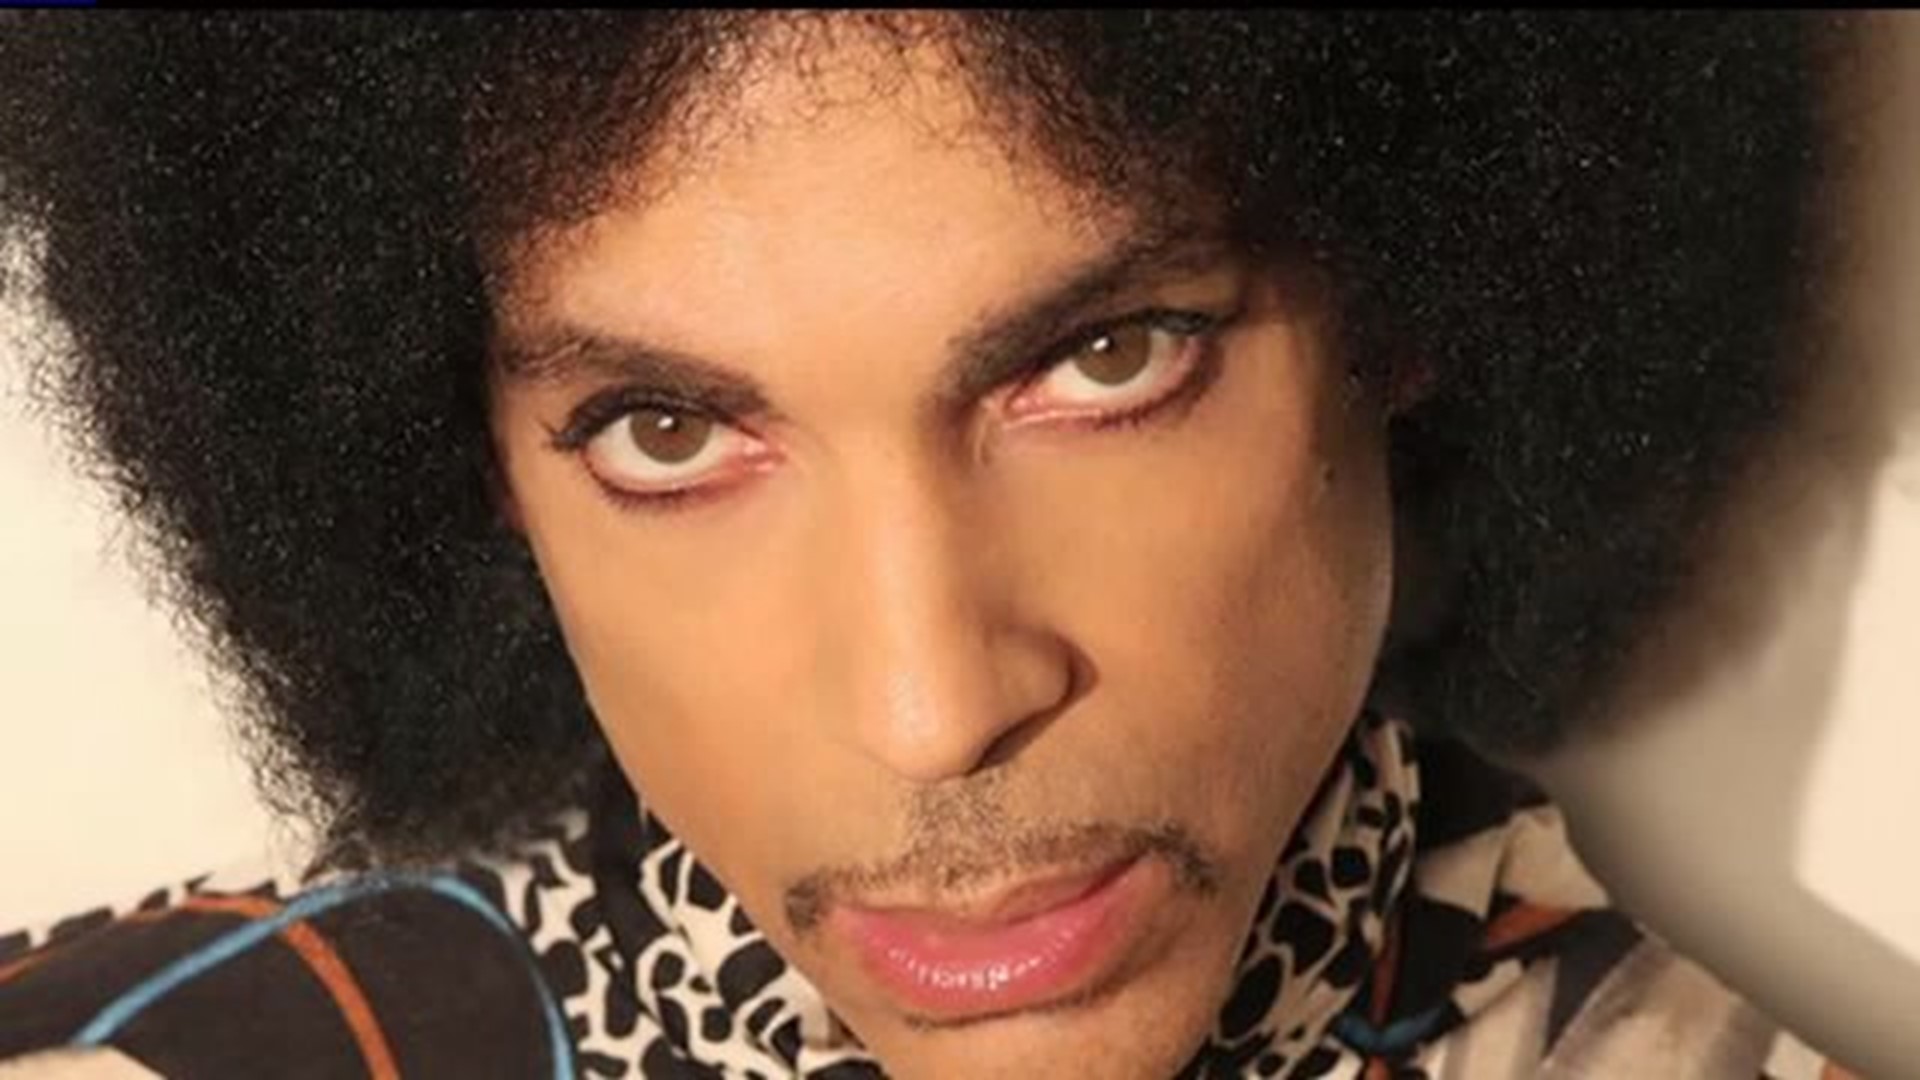 Prince album set for release 5 years after his passing | wqad.com